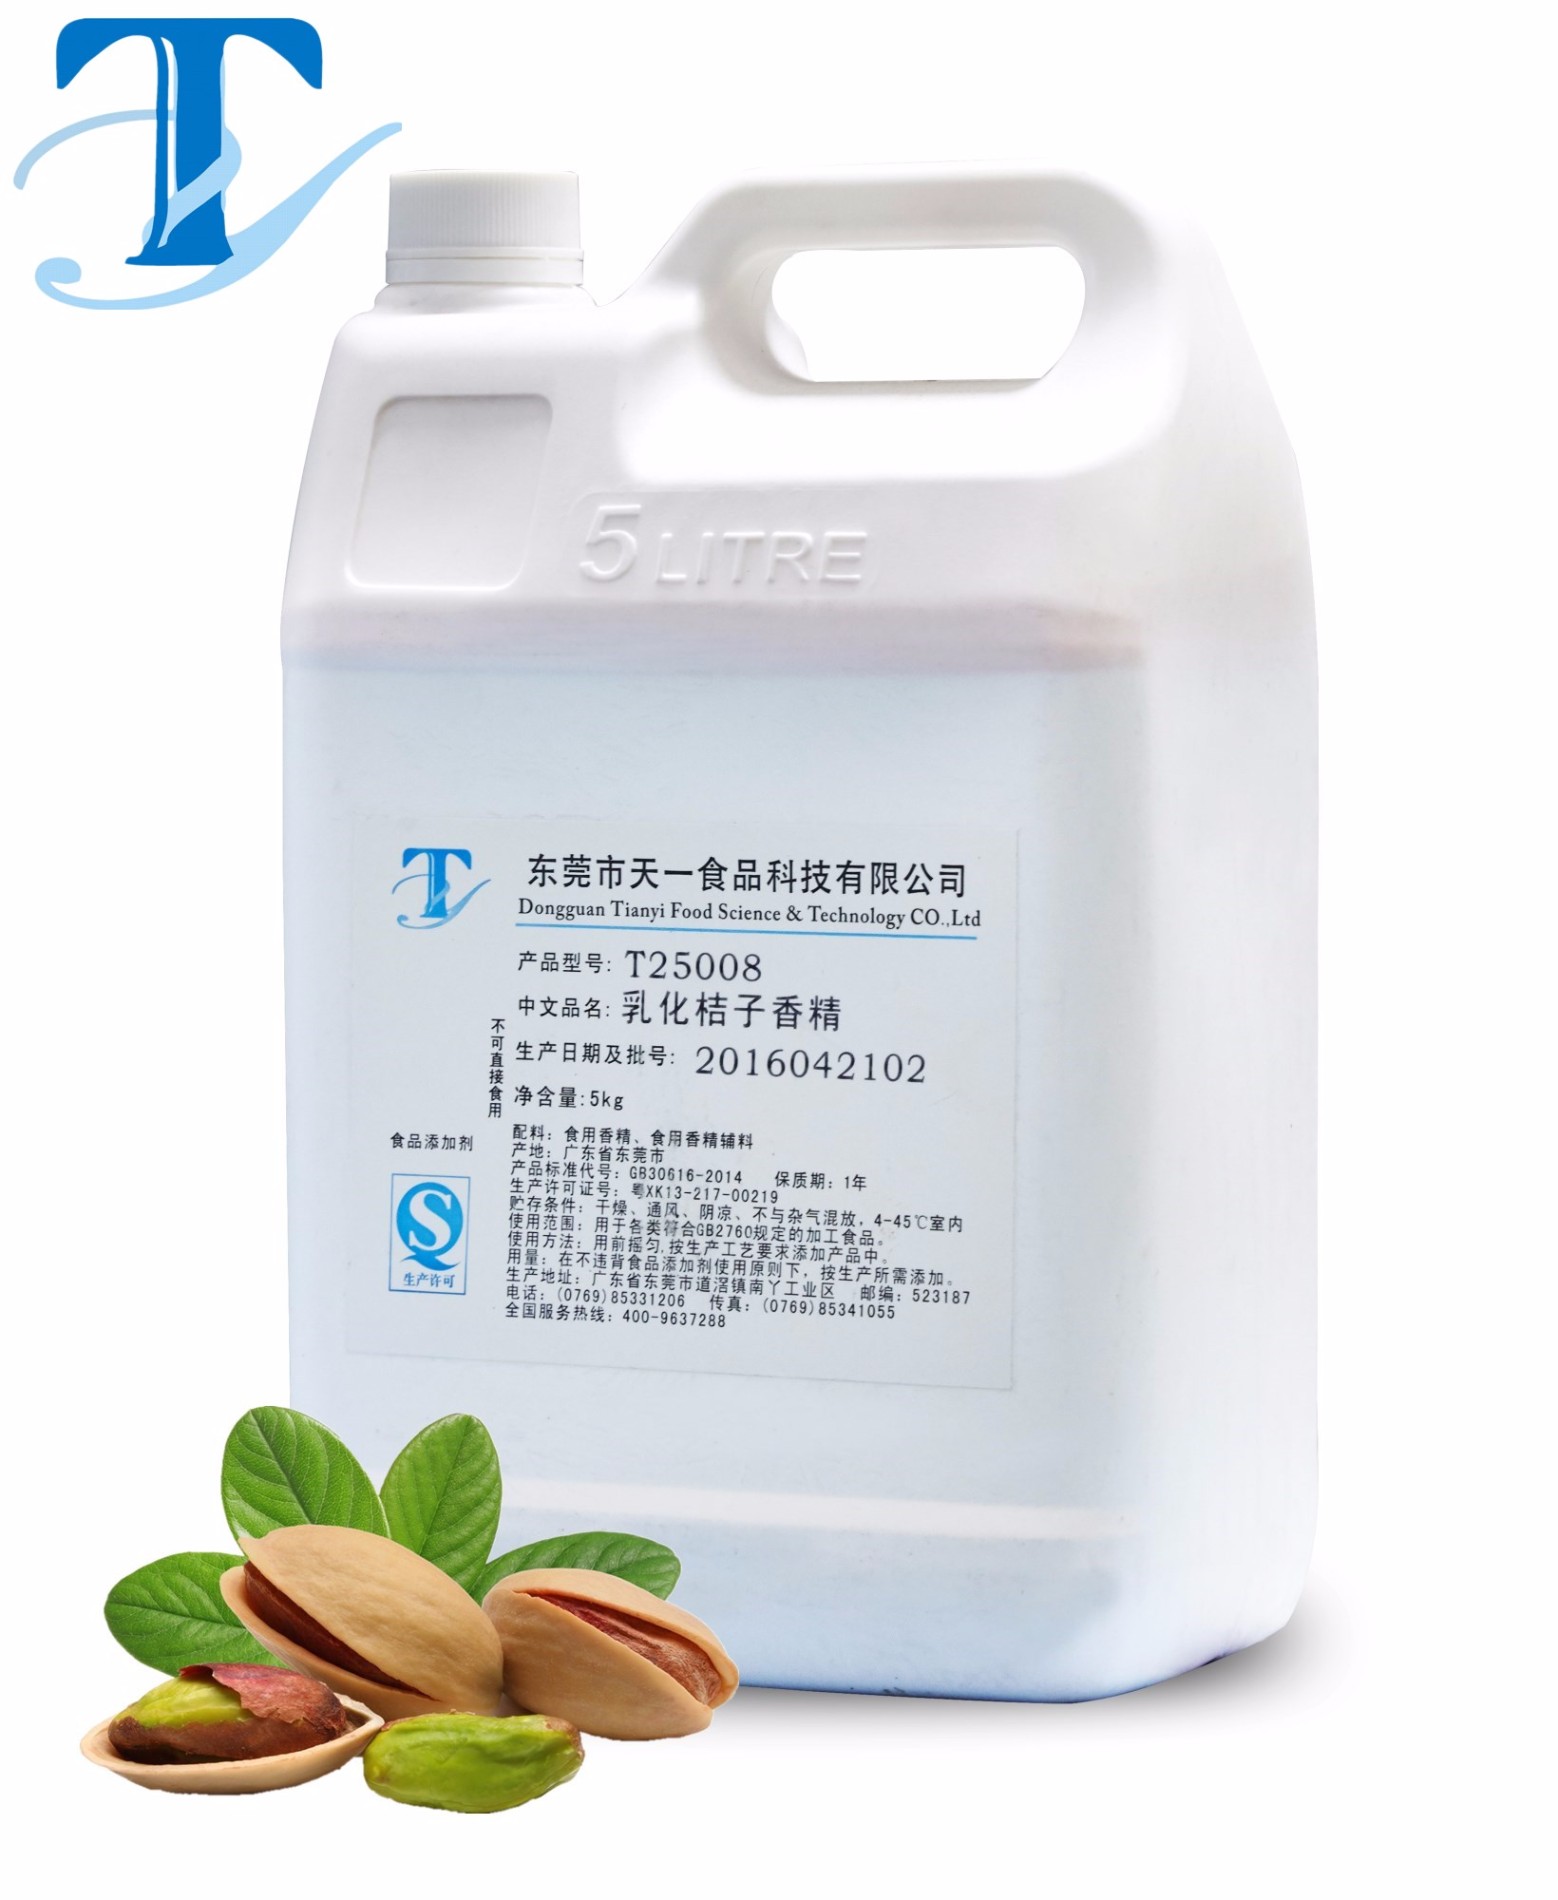 China Supplier With Low Factory Pirce Pistachio Flavor